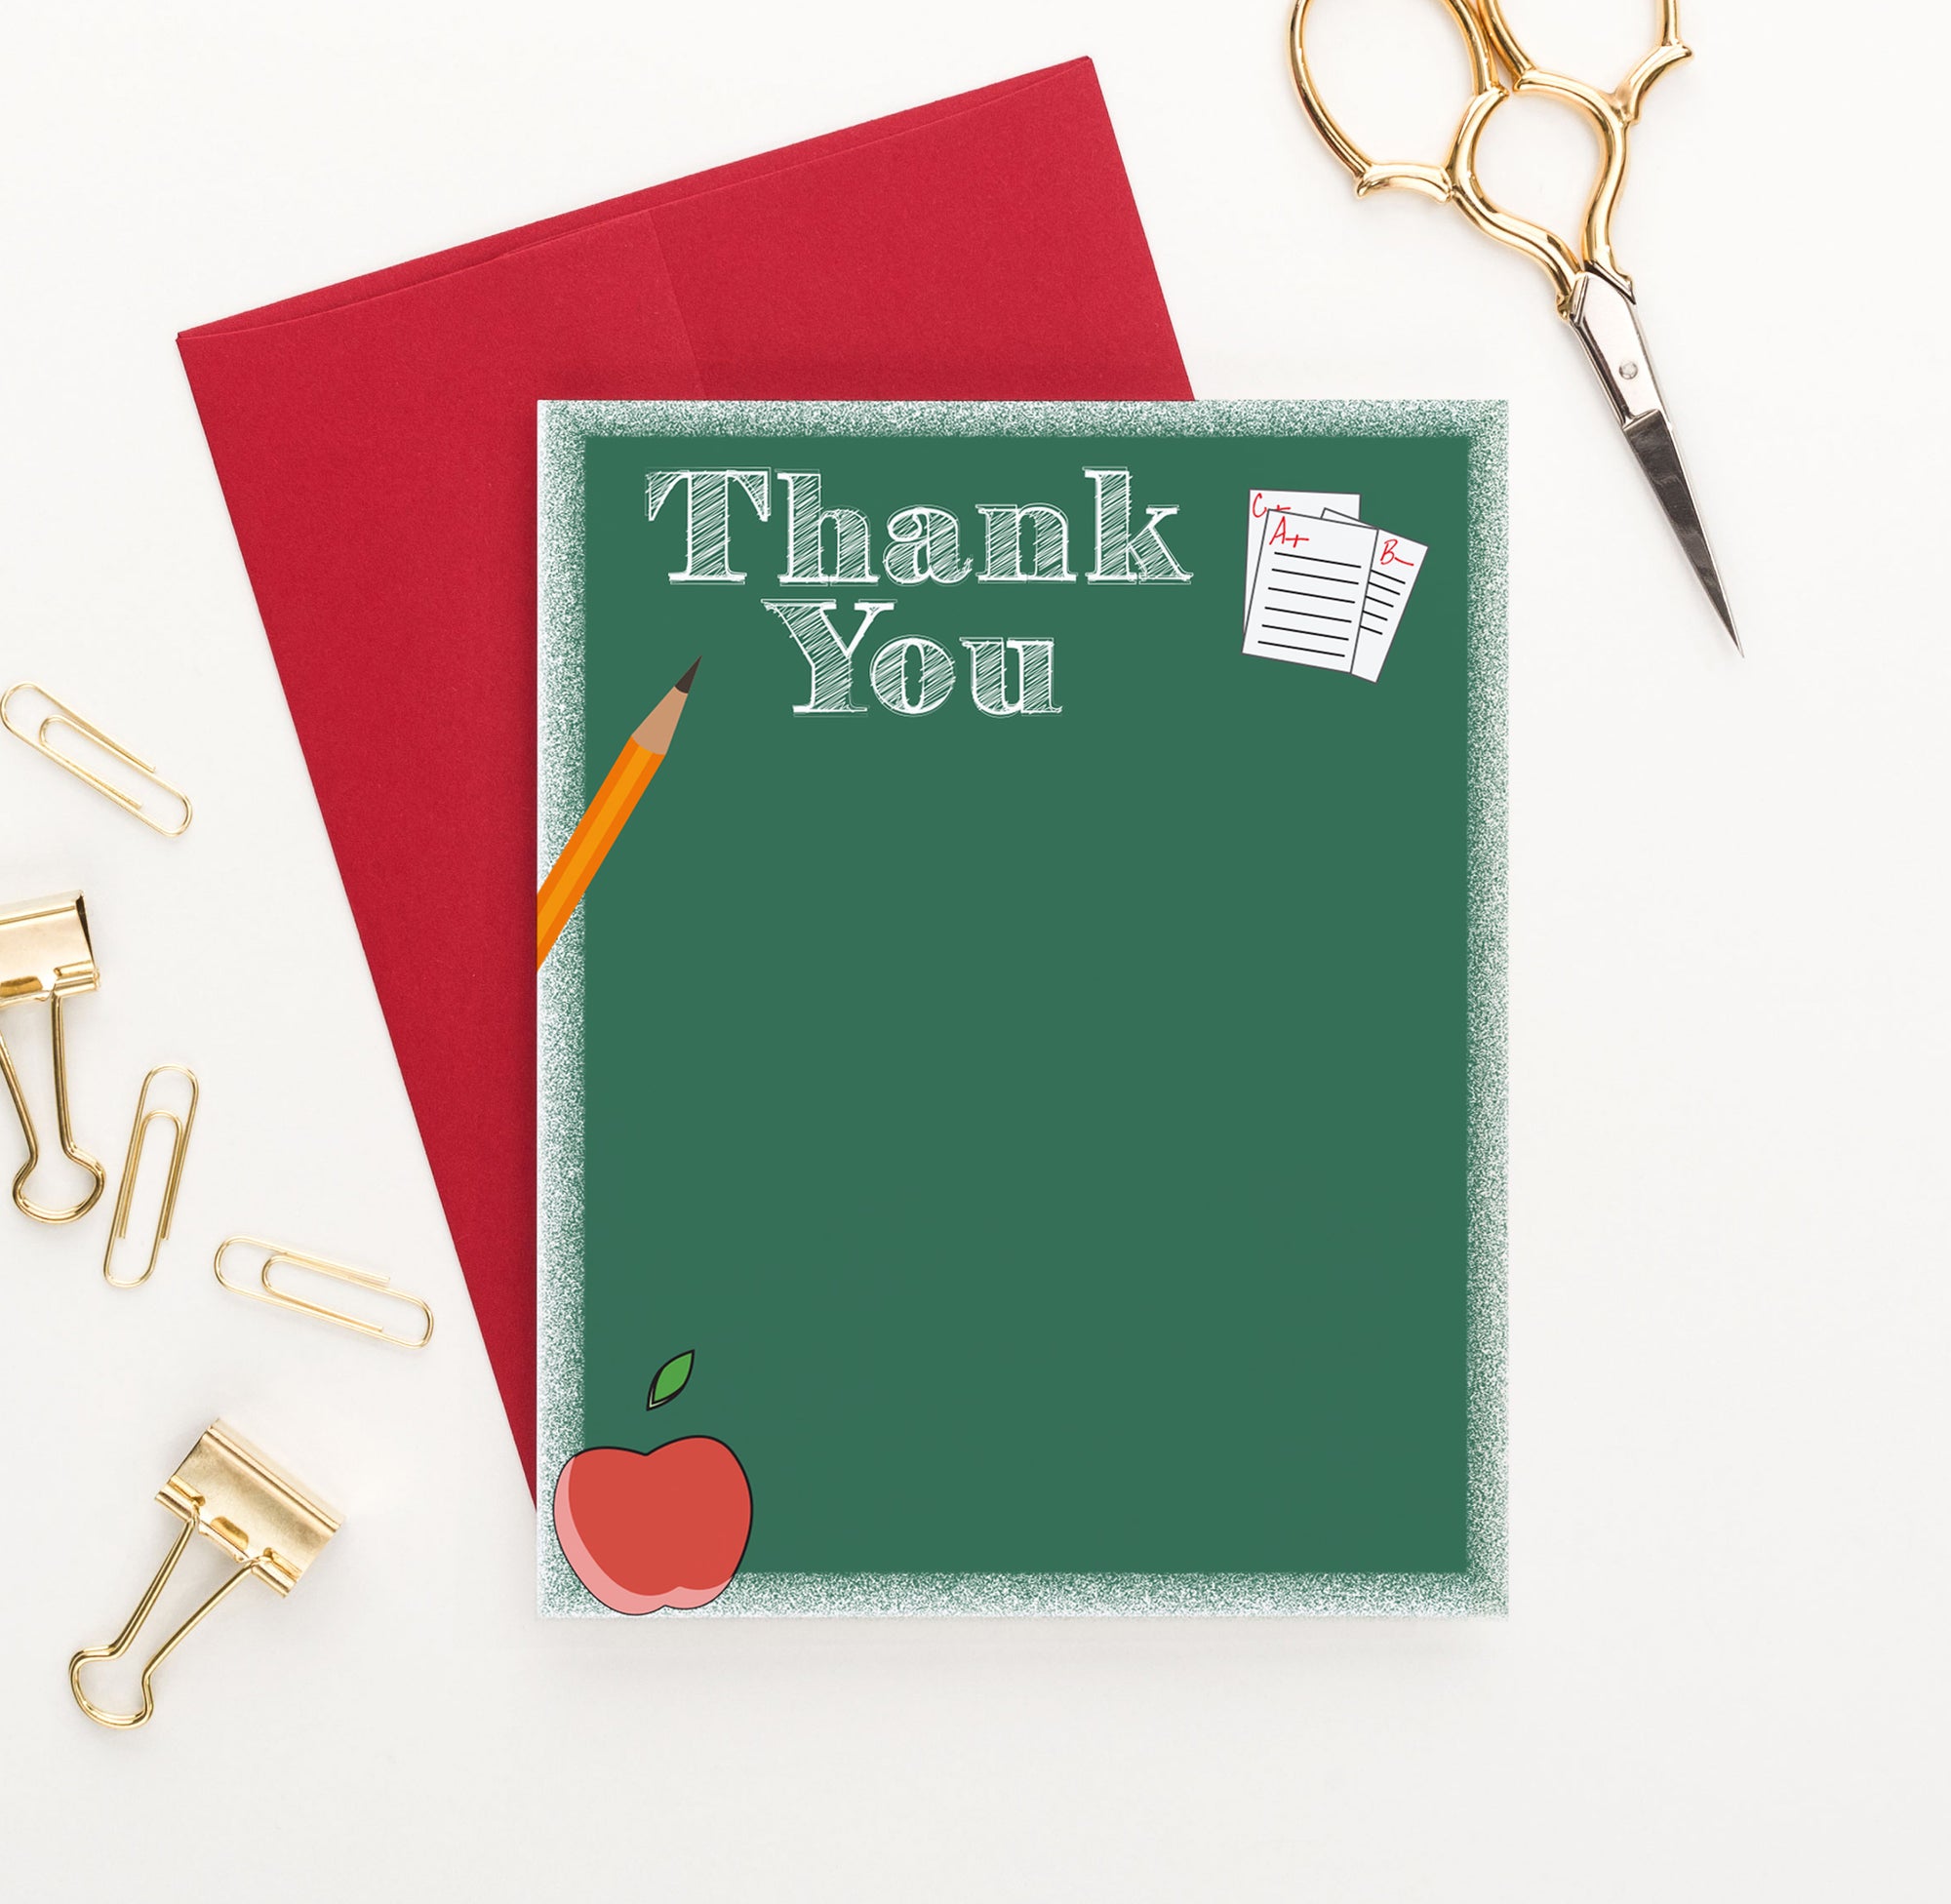 TY091 College Graduation Thank You Cards for Educators principal counselor high school